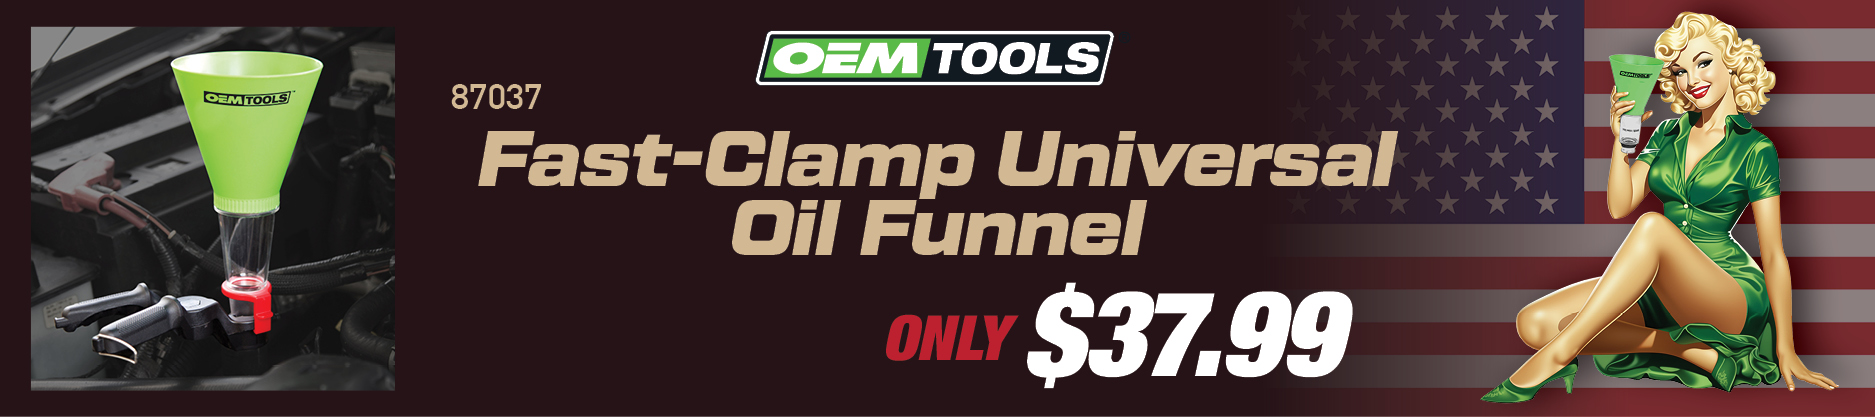 OEMTOOLS 87037 Fast-Clamp Universal Oil Funnel ONLY $37.99!